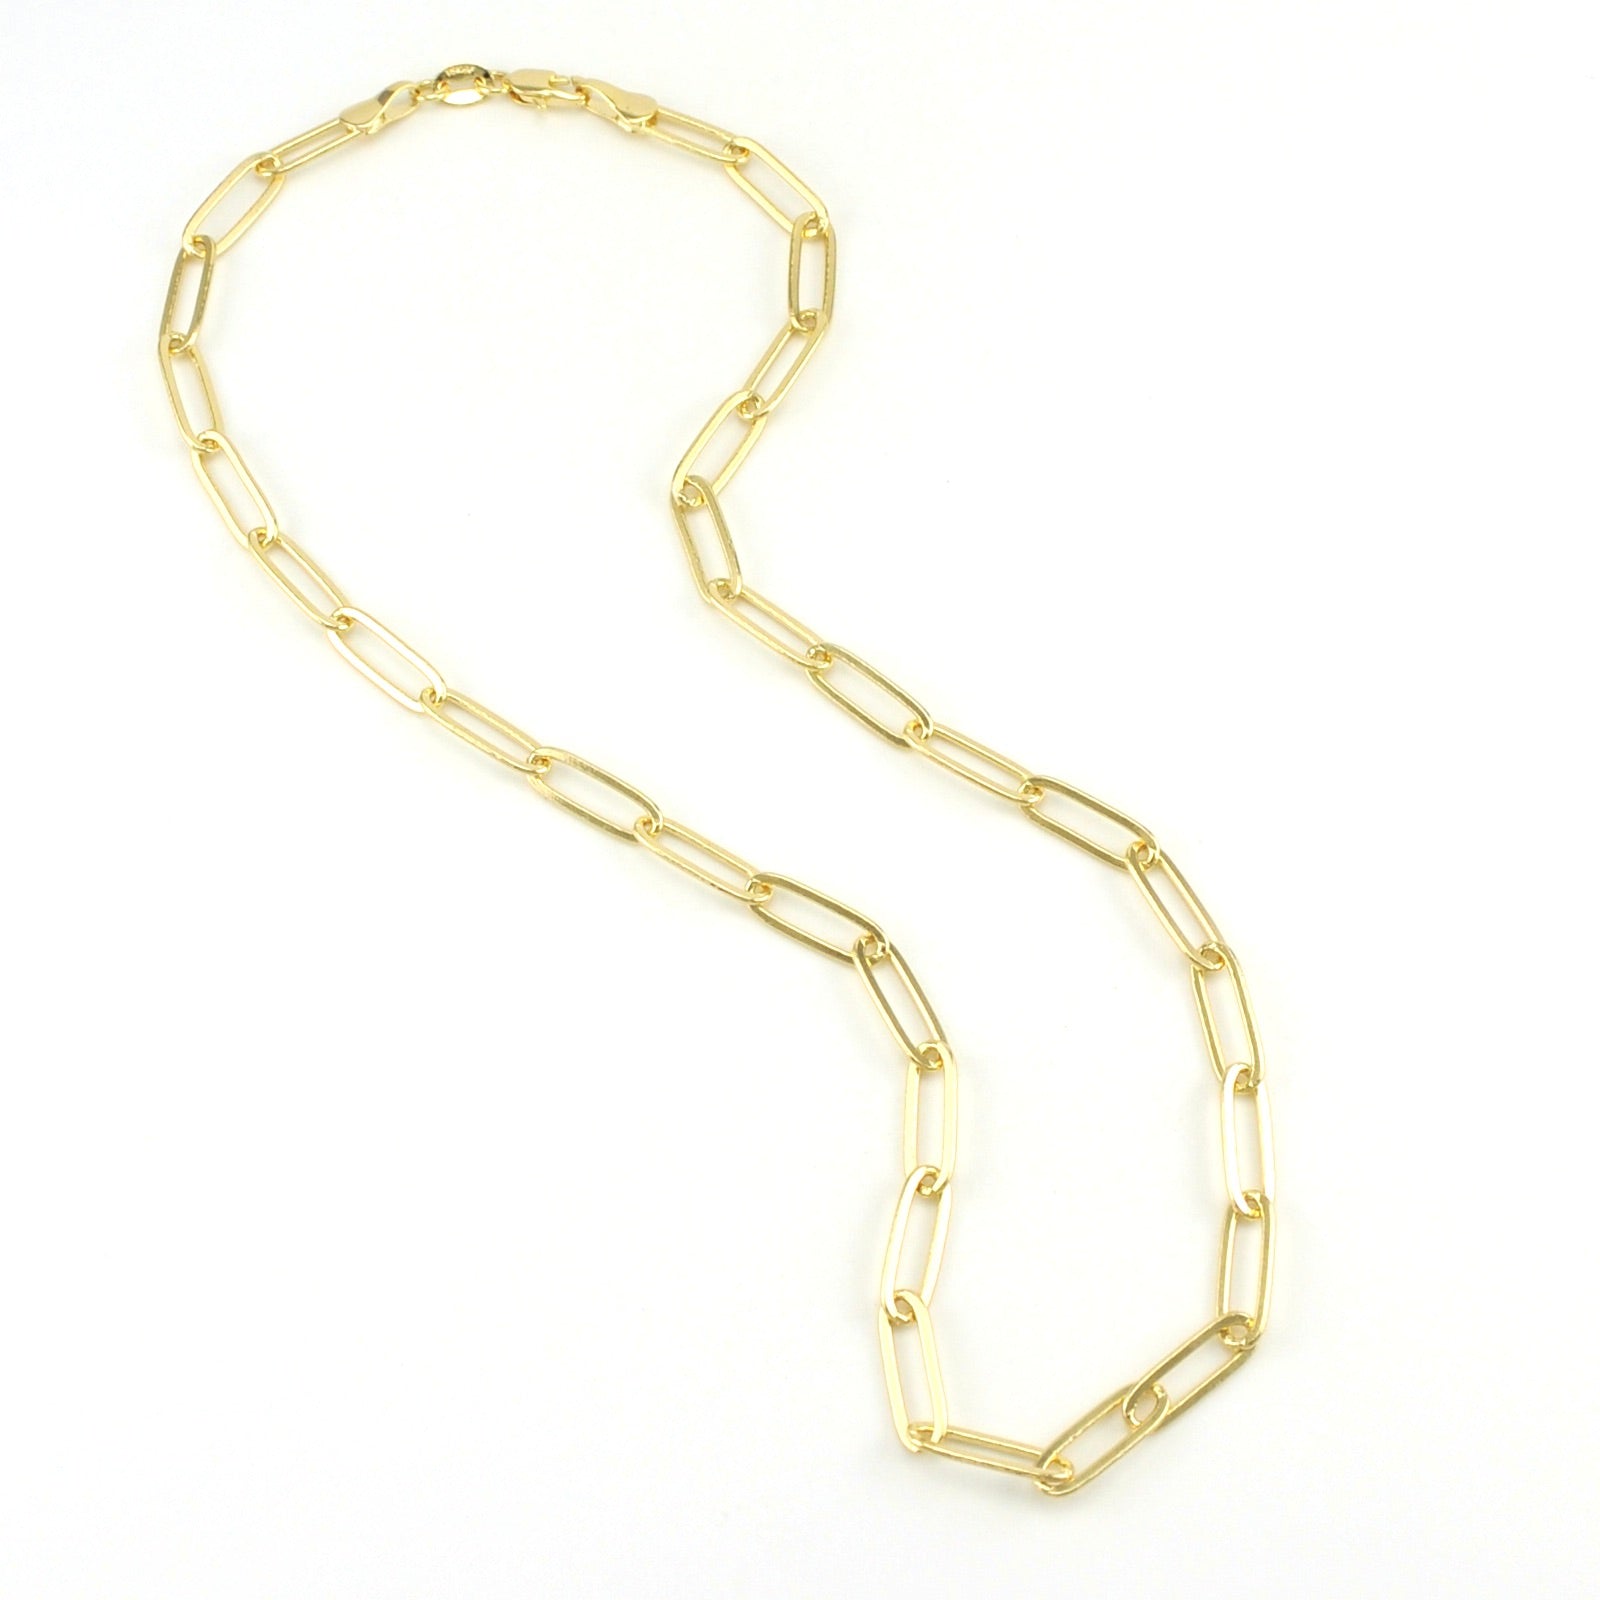 16 inch Delicate Paperclip Chain